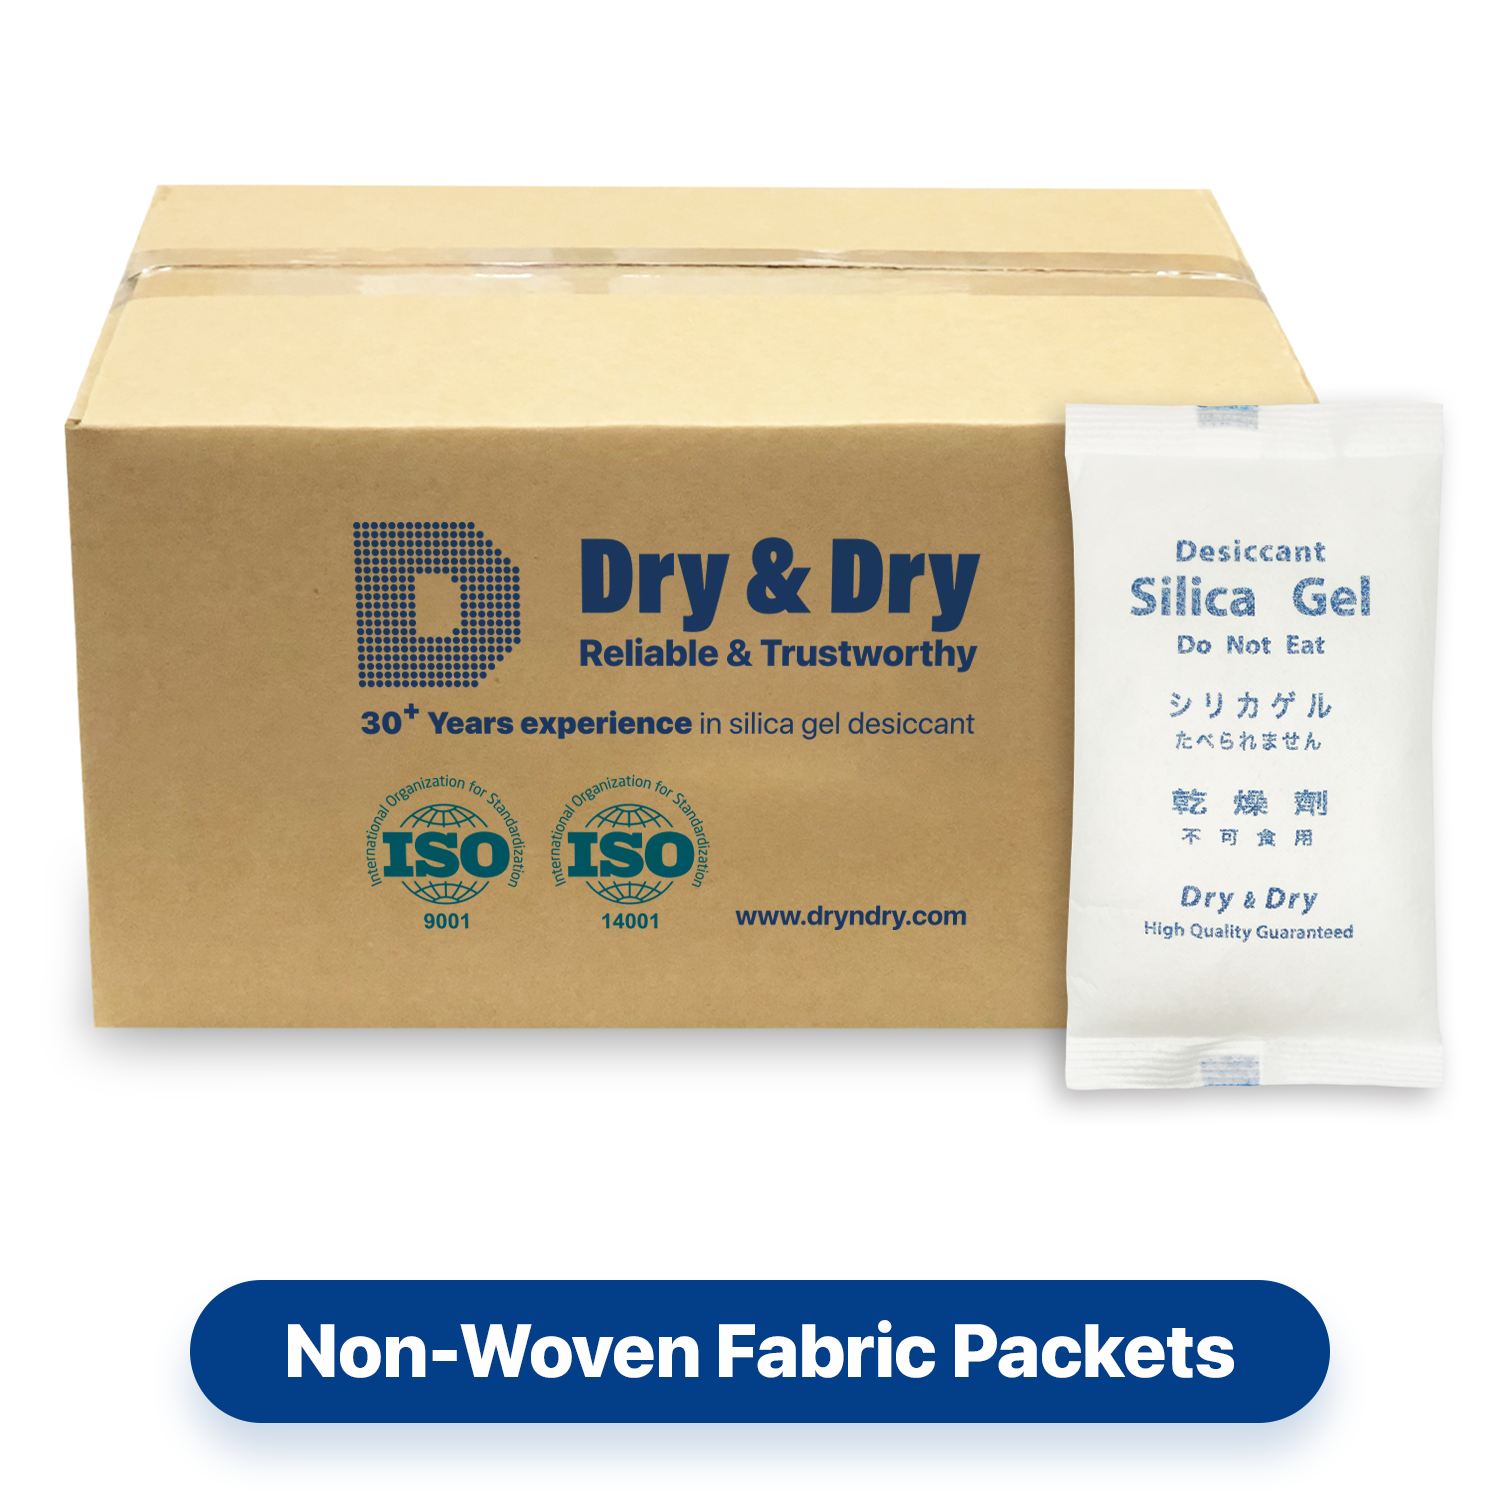 500 Gram [40 Packets]  "Dry & Dry" Premium Silica Gel Desiccant Packets - Rechargeable Non-Woven Fabric (Cloth)